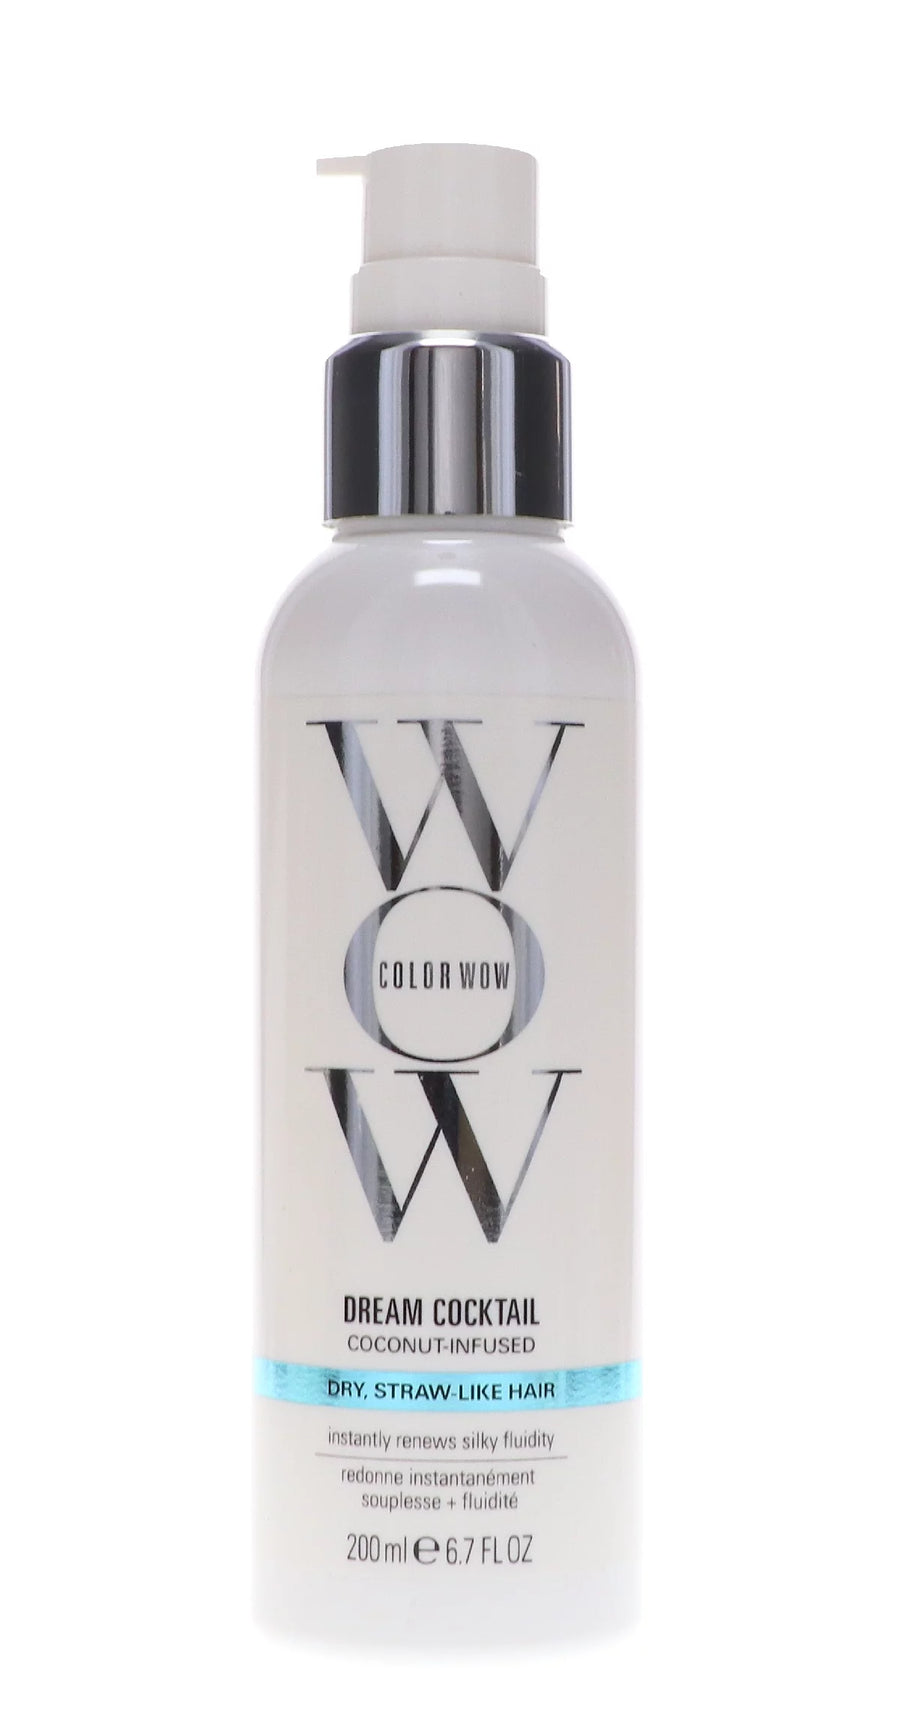 Color Wow Coconut-Infused Dream Cocktail image of 6.7 oz bottle